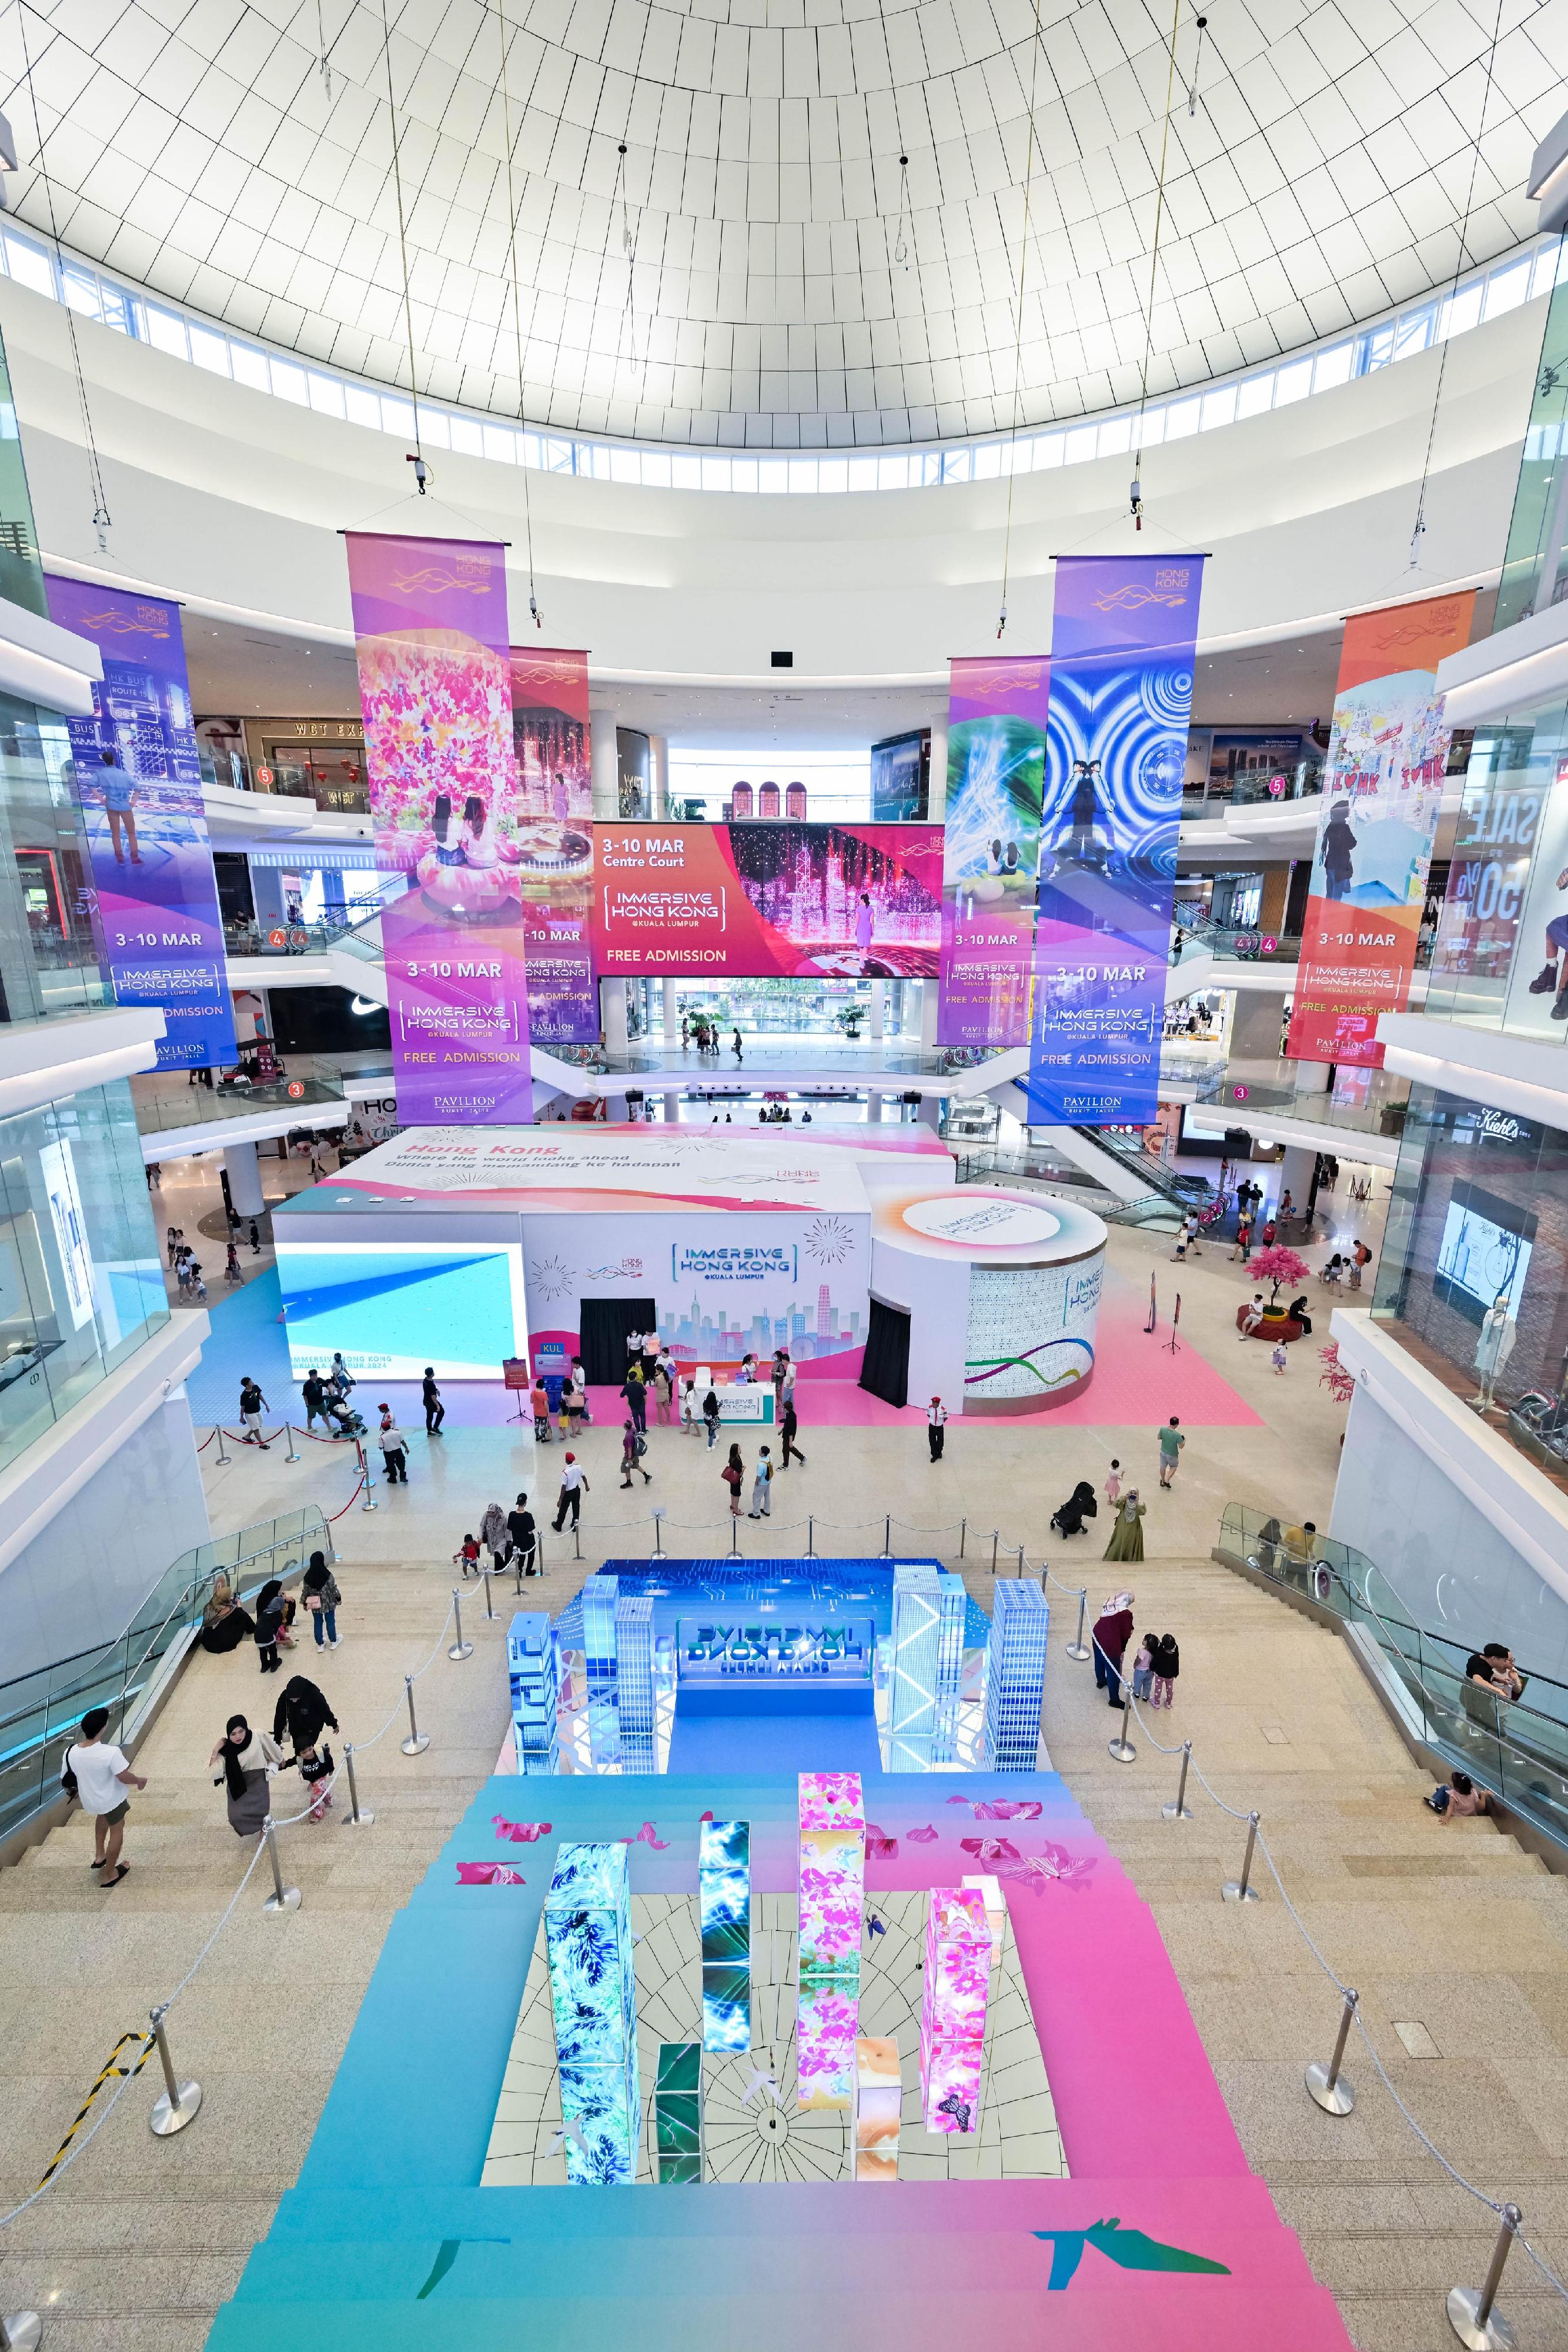 The "Immersive Hong Kong" roving exhibition, which showcases Hong Kong's unique strengths, advantages and opportunities with art technology, was launched in Kuala Lumpur, Malaysia, today (March 3) as part of a promotional campaign in Association of Southeast Asian Nations countries. The exhibition will run at Pavilion Bukit Jalil, a major shopping centre in Kuala Lumpur, until March 10.  